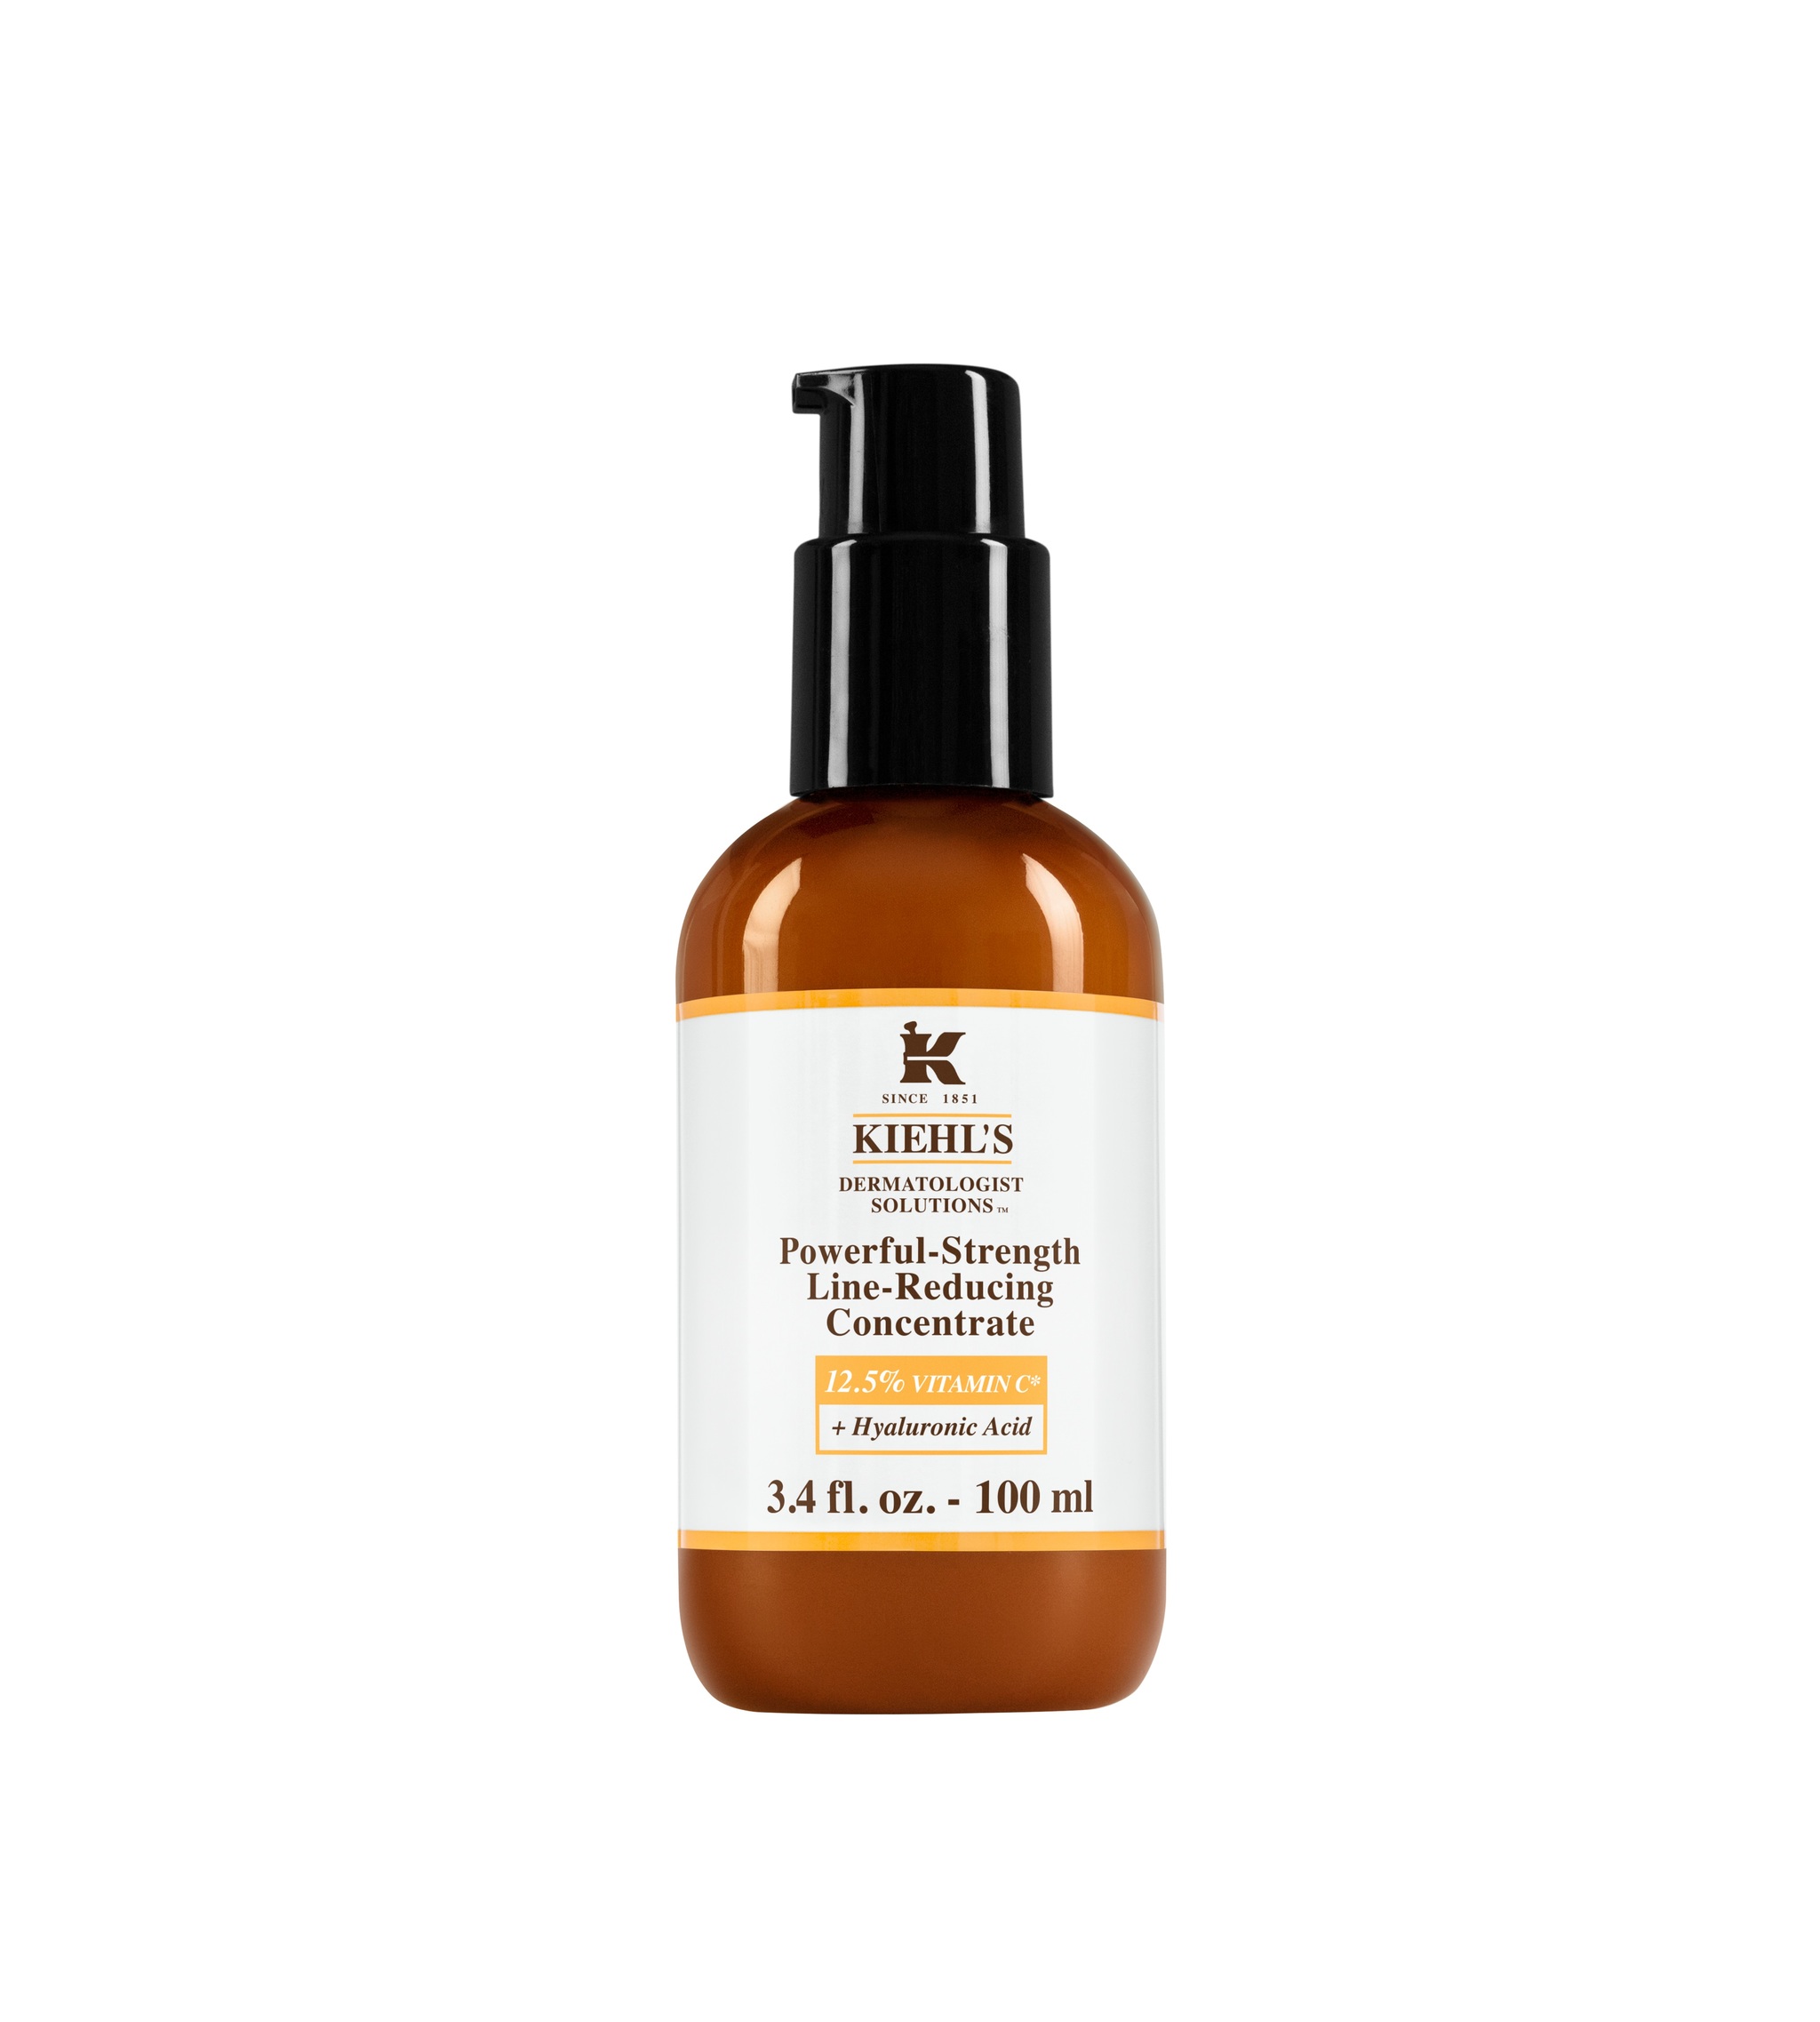 Powerfull-strenght line reducing concentrate, Kiehls 57 euros.